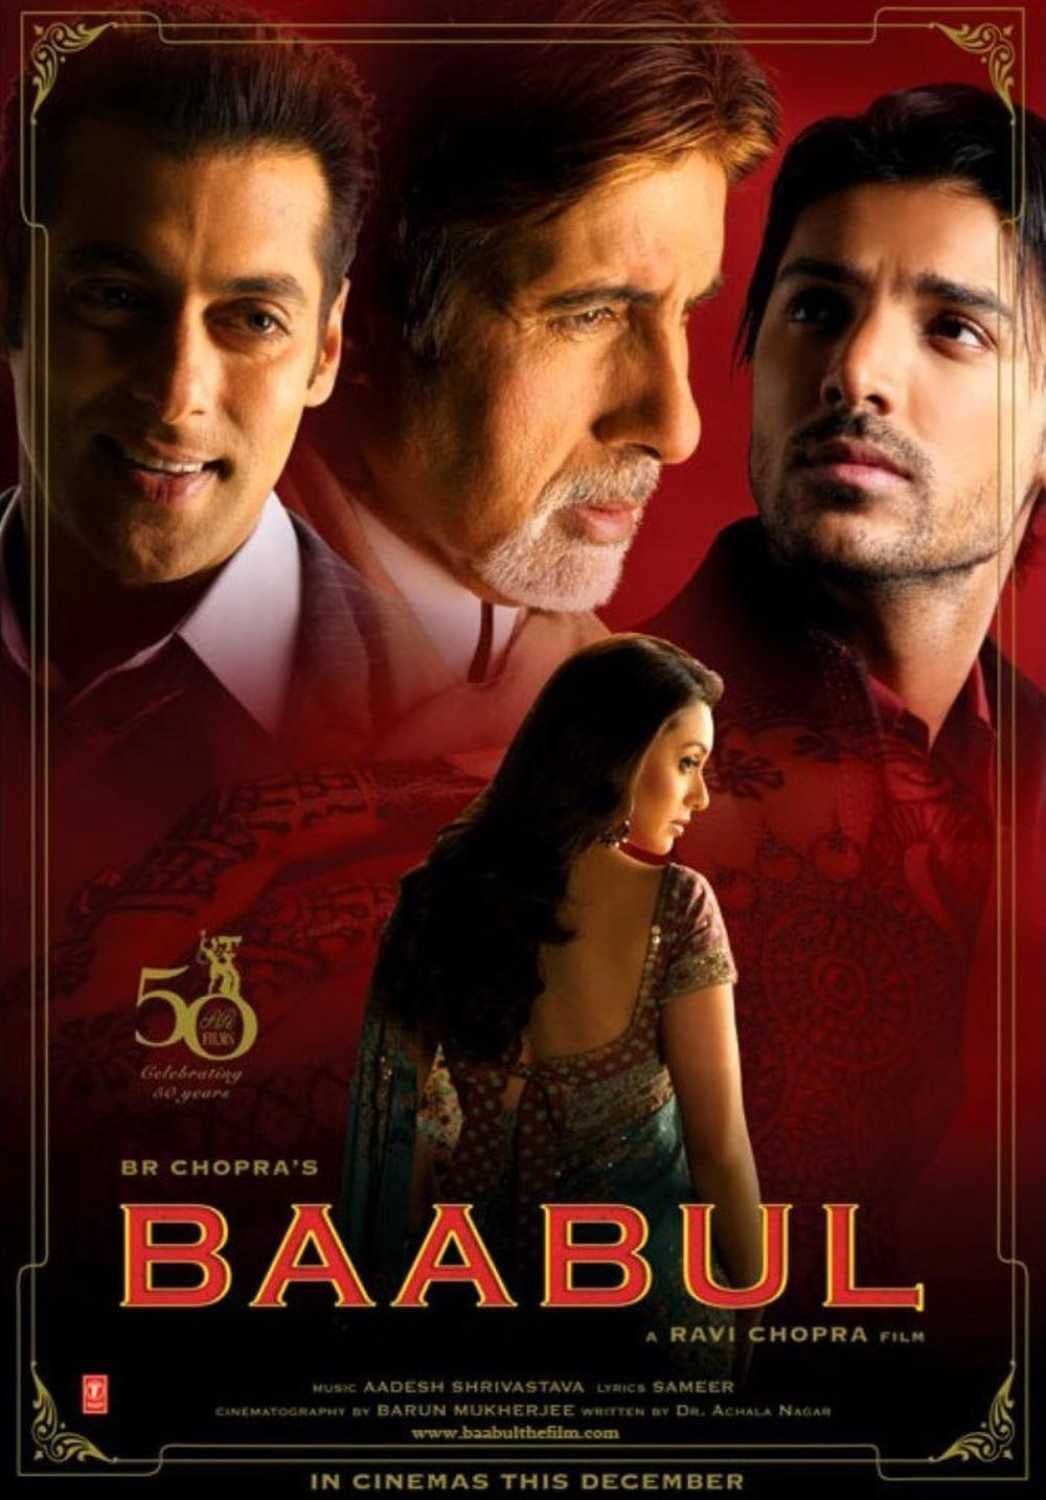 Baabul Movie Cast, Release Date, Trailer, Songs and Ratings